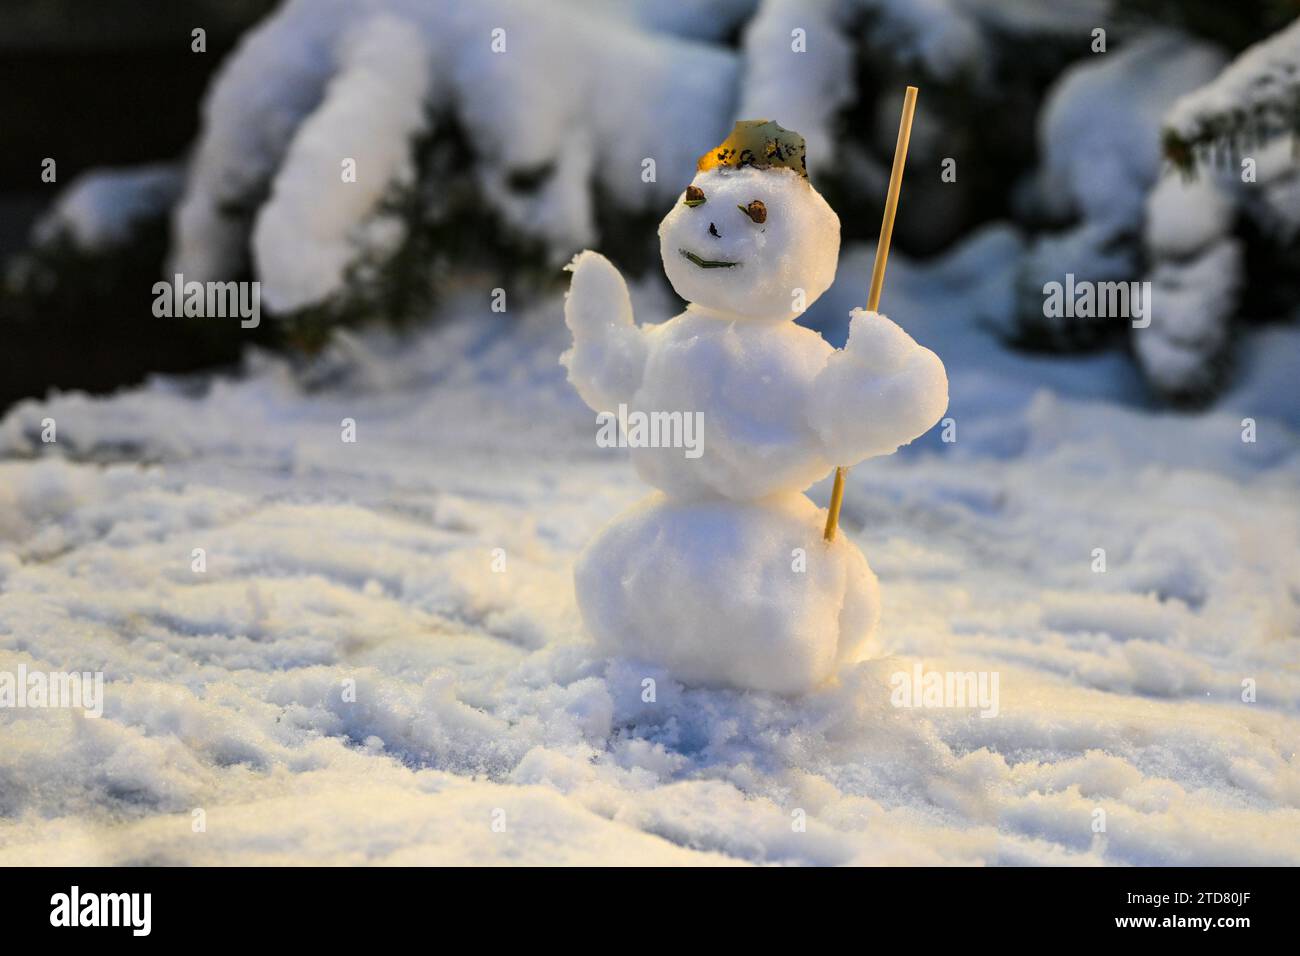 Little cute snowman in front of snow-covered fir trees, winter fun and greeting card for holidays like Christmas or new year, copy space, selected foc Stock Photo